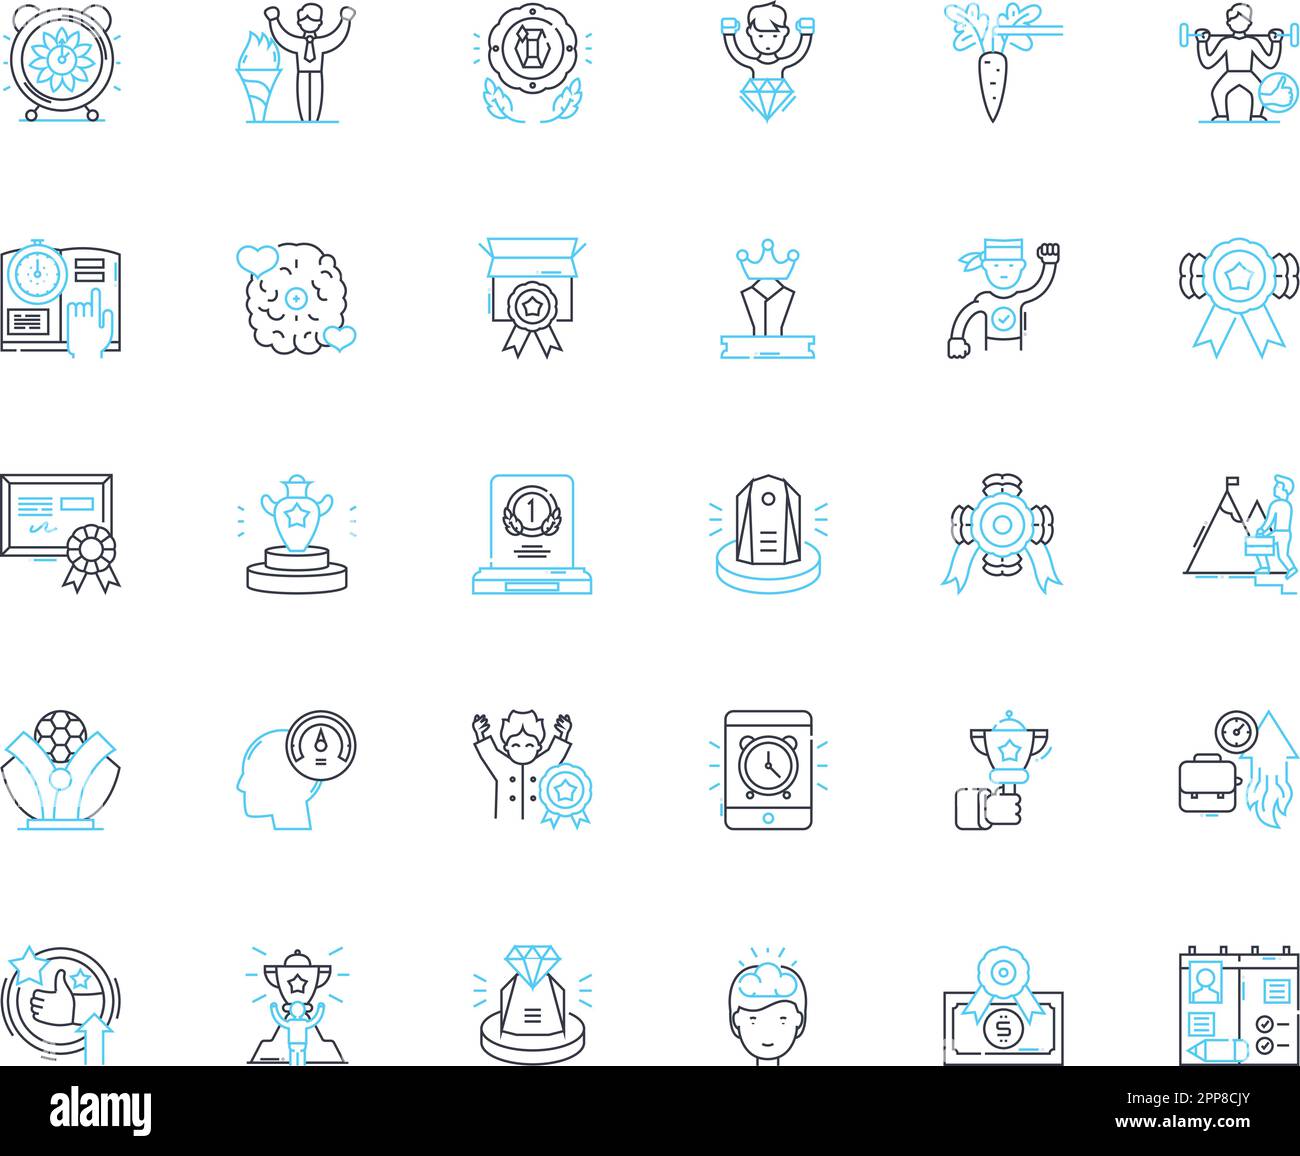 Professional Coaching linear icons set. Guidance, Mentorship, Advancement, Empowerment, Support, Development, Accountability line vector and concept Stock Vector